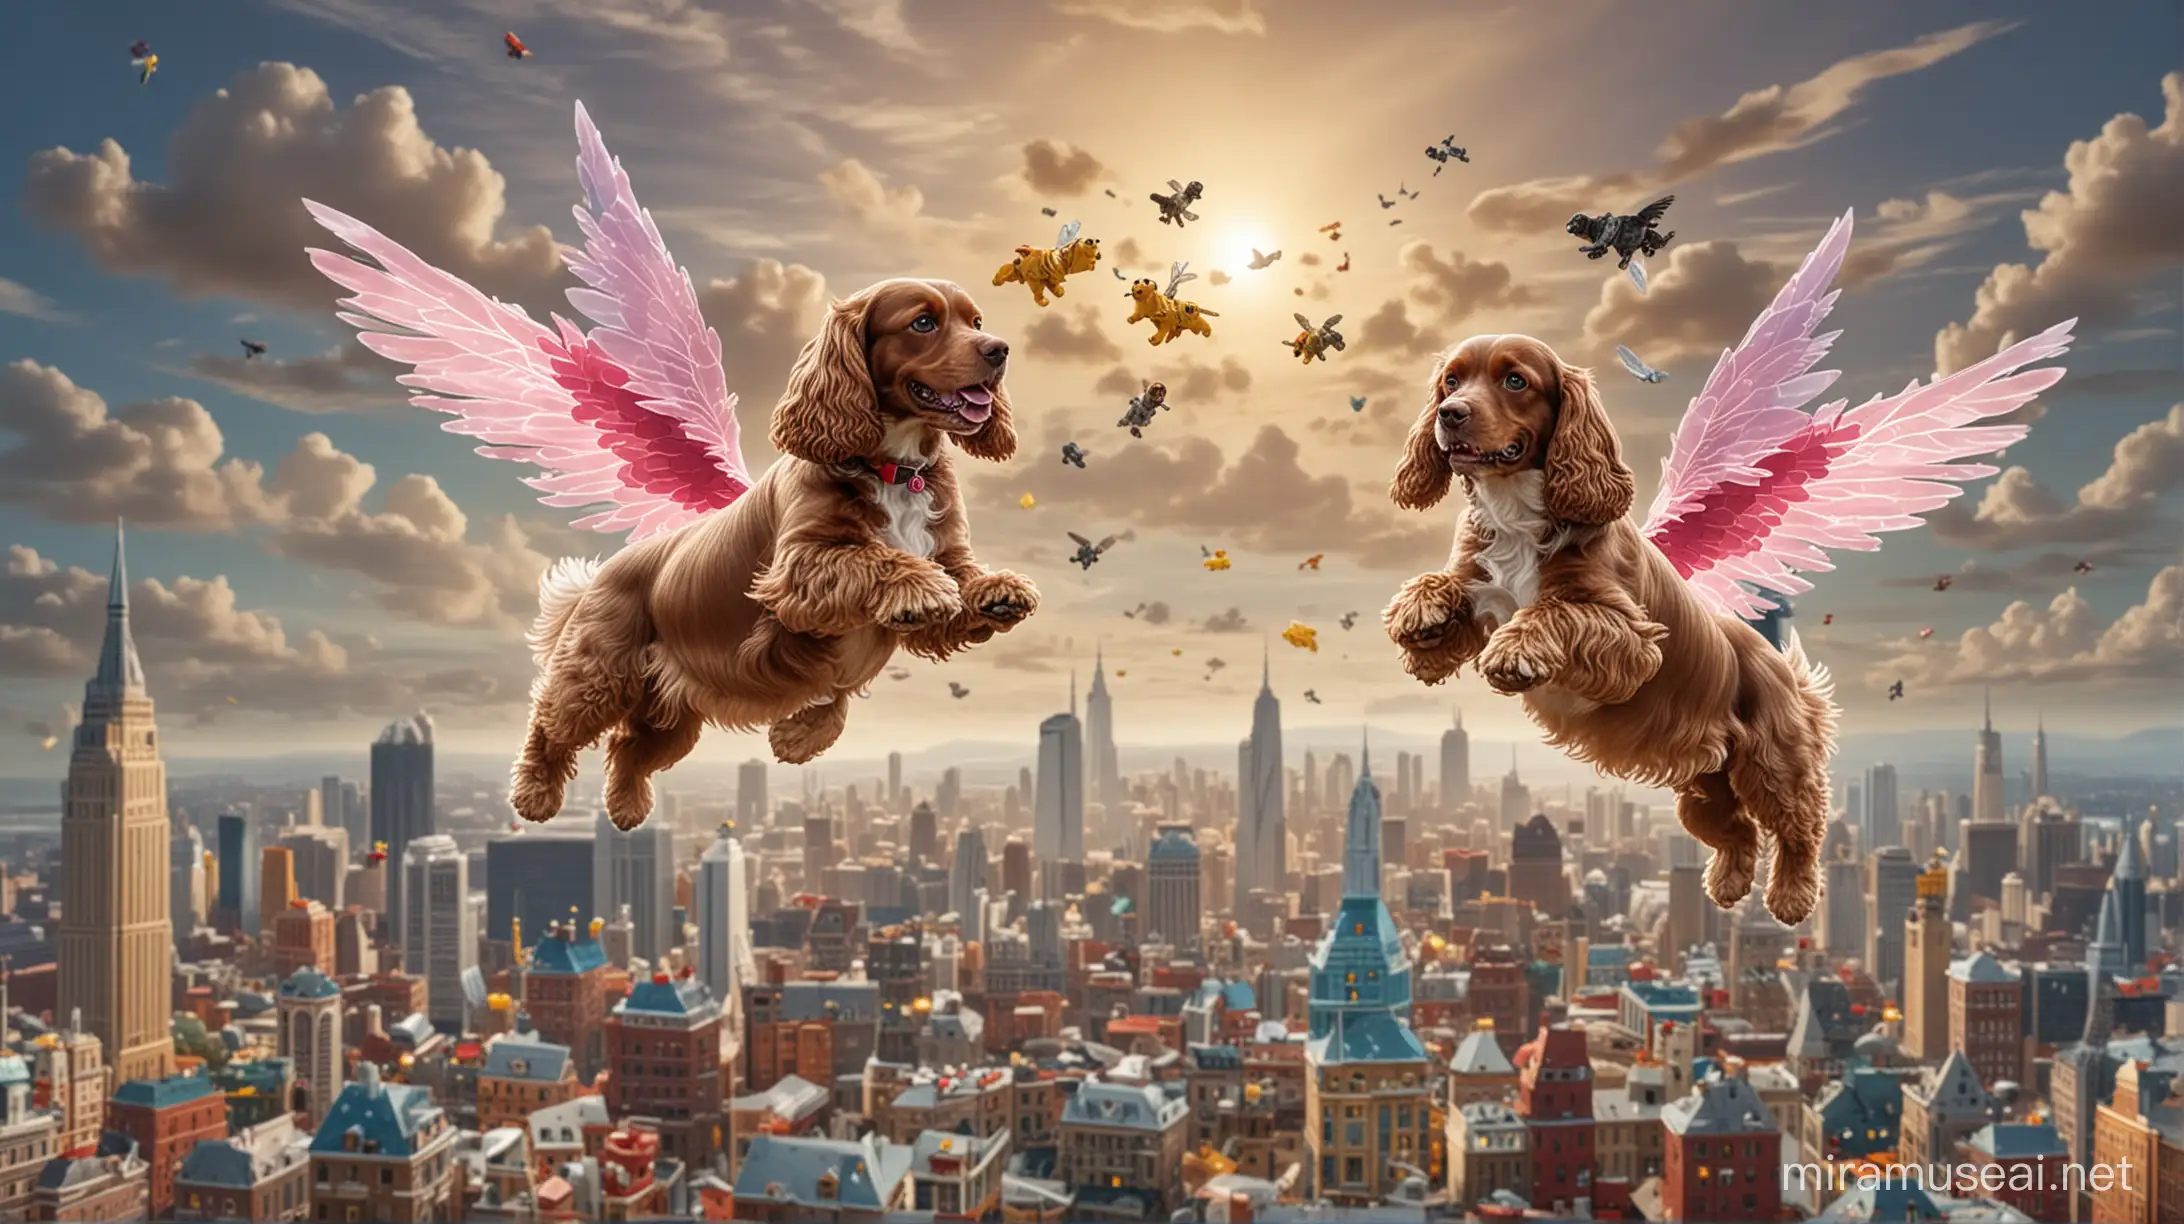 Two cocker spaniels with fairy wings flying over a city made of legos